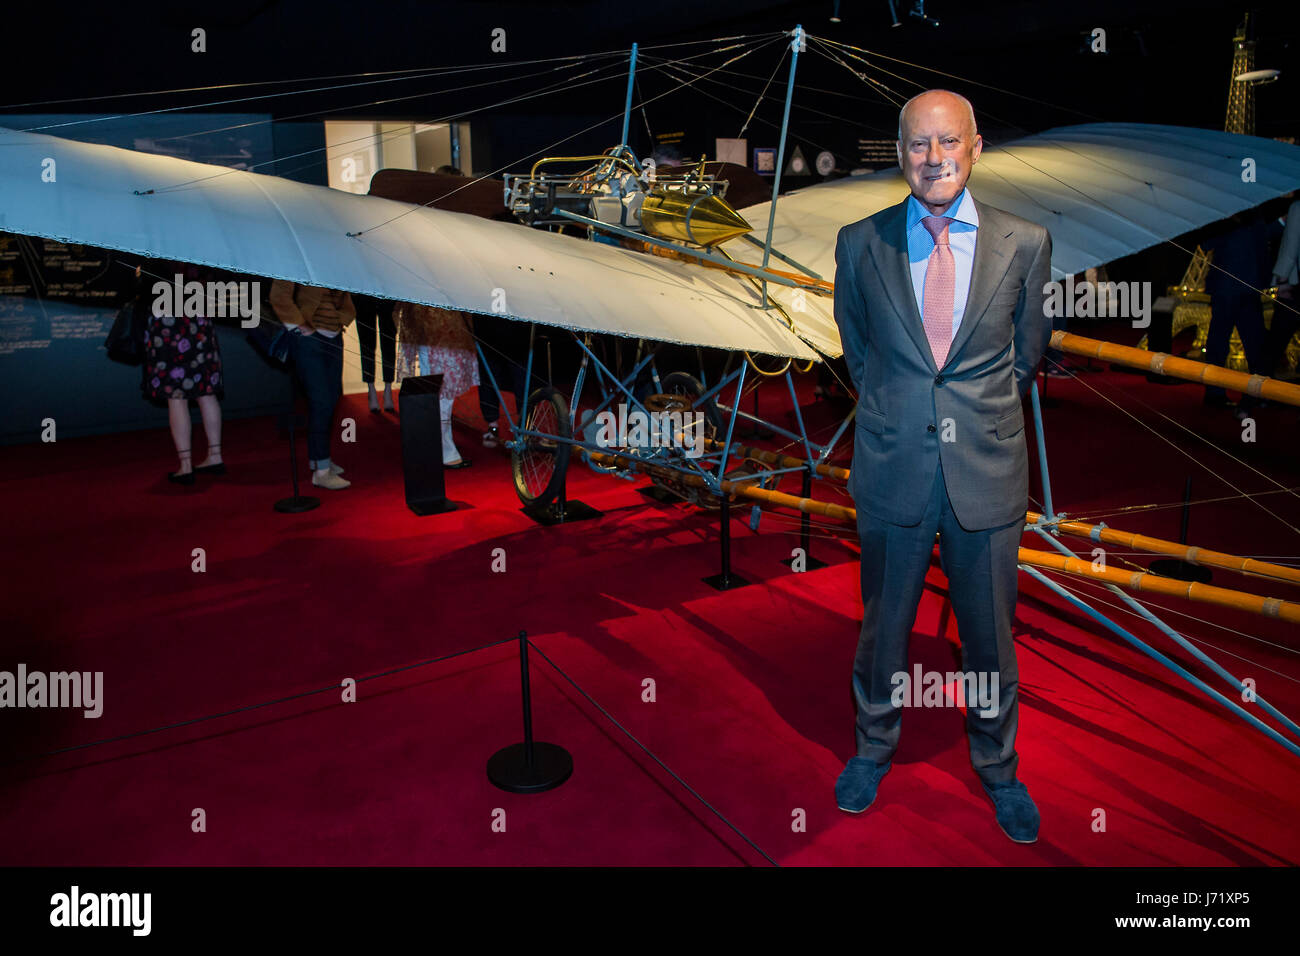 London, UK. 23rd May, 2017. Lord Norman Foster, one of the curators with a replica of the Santos-Dumont 20 aeroplane- The Cartier in Motion exhibition at the design museum. London 23 May 2017. Credit: Guy Bell/Alamy Live News Stock Photo